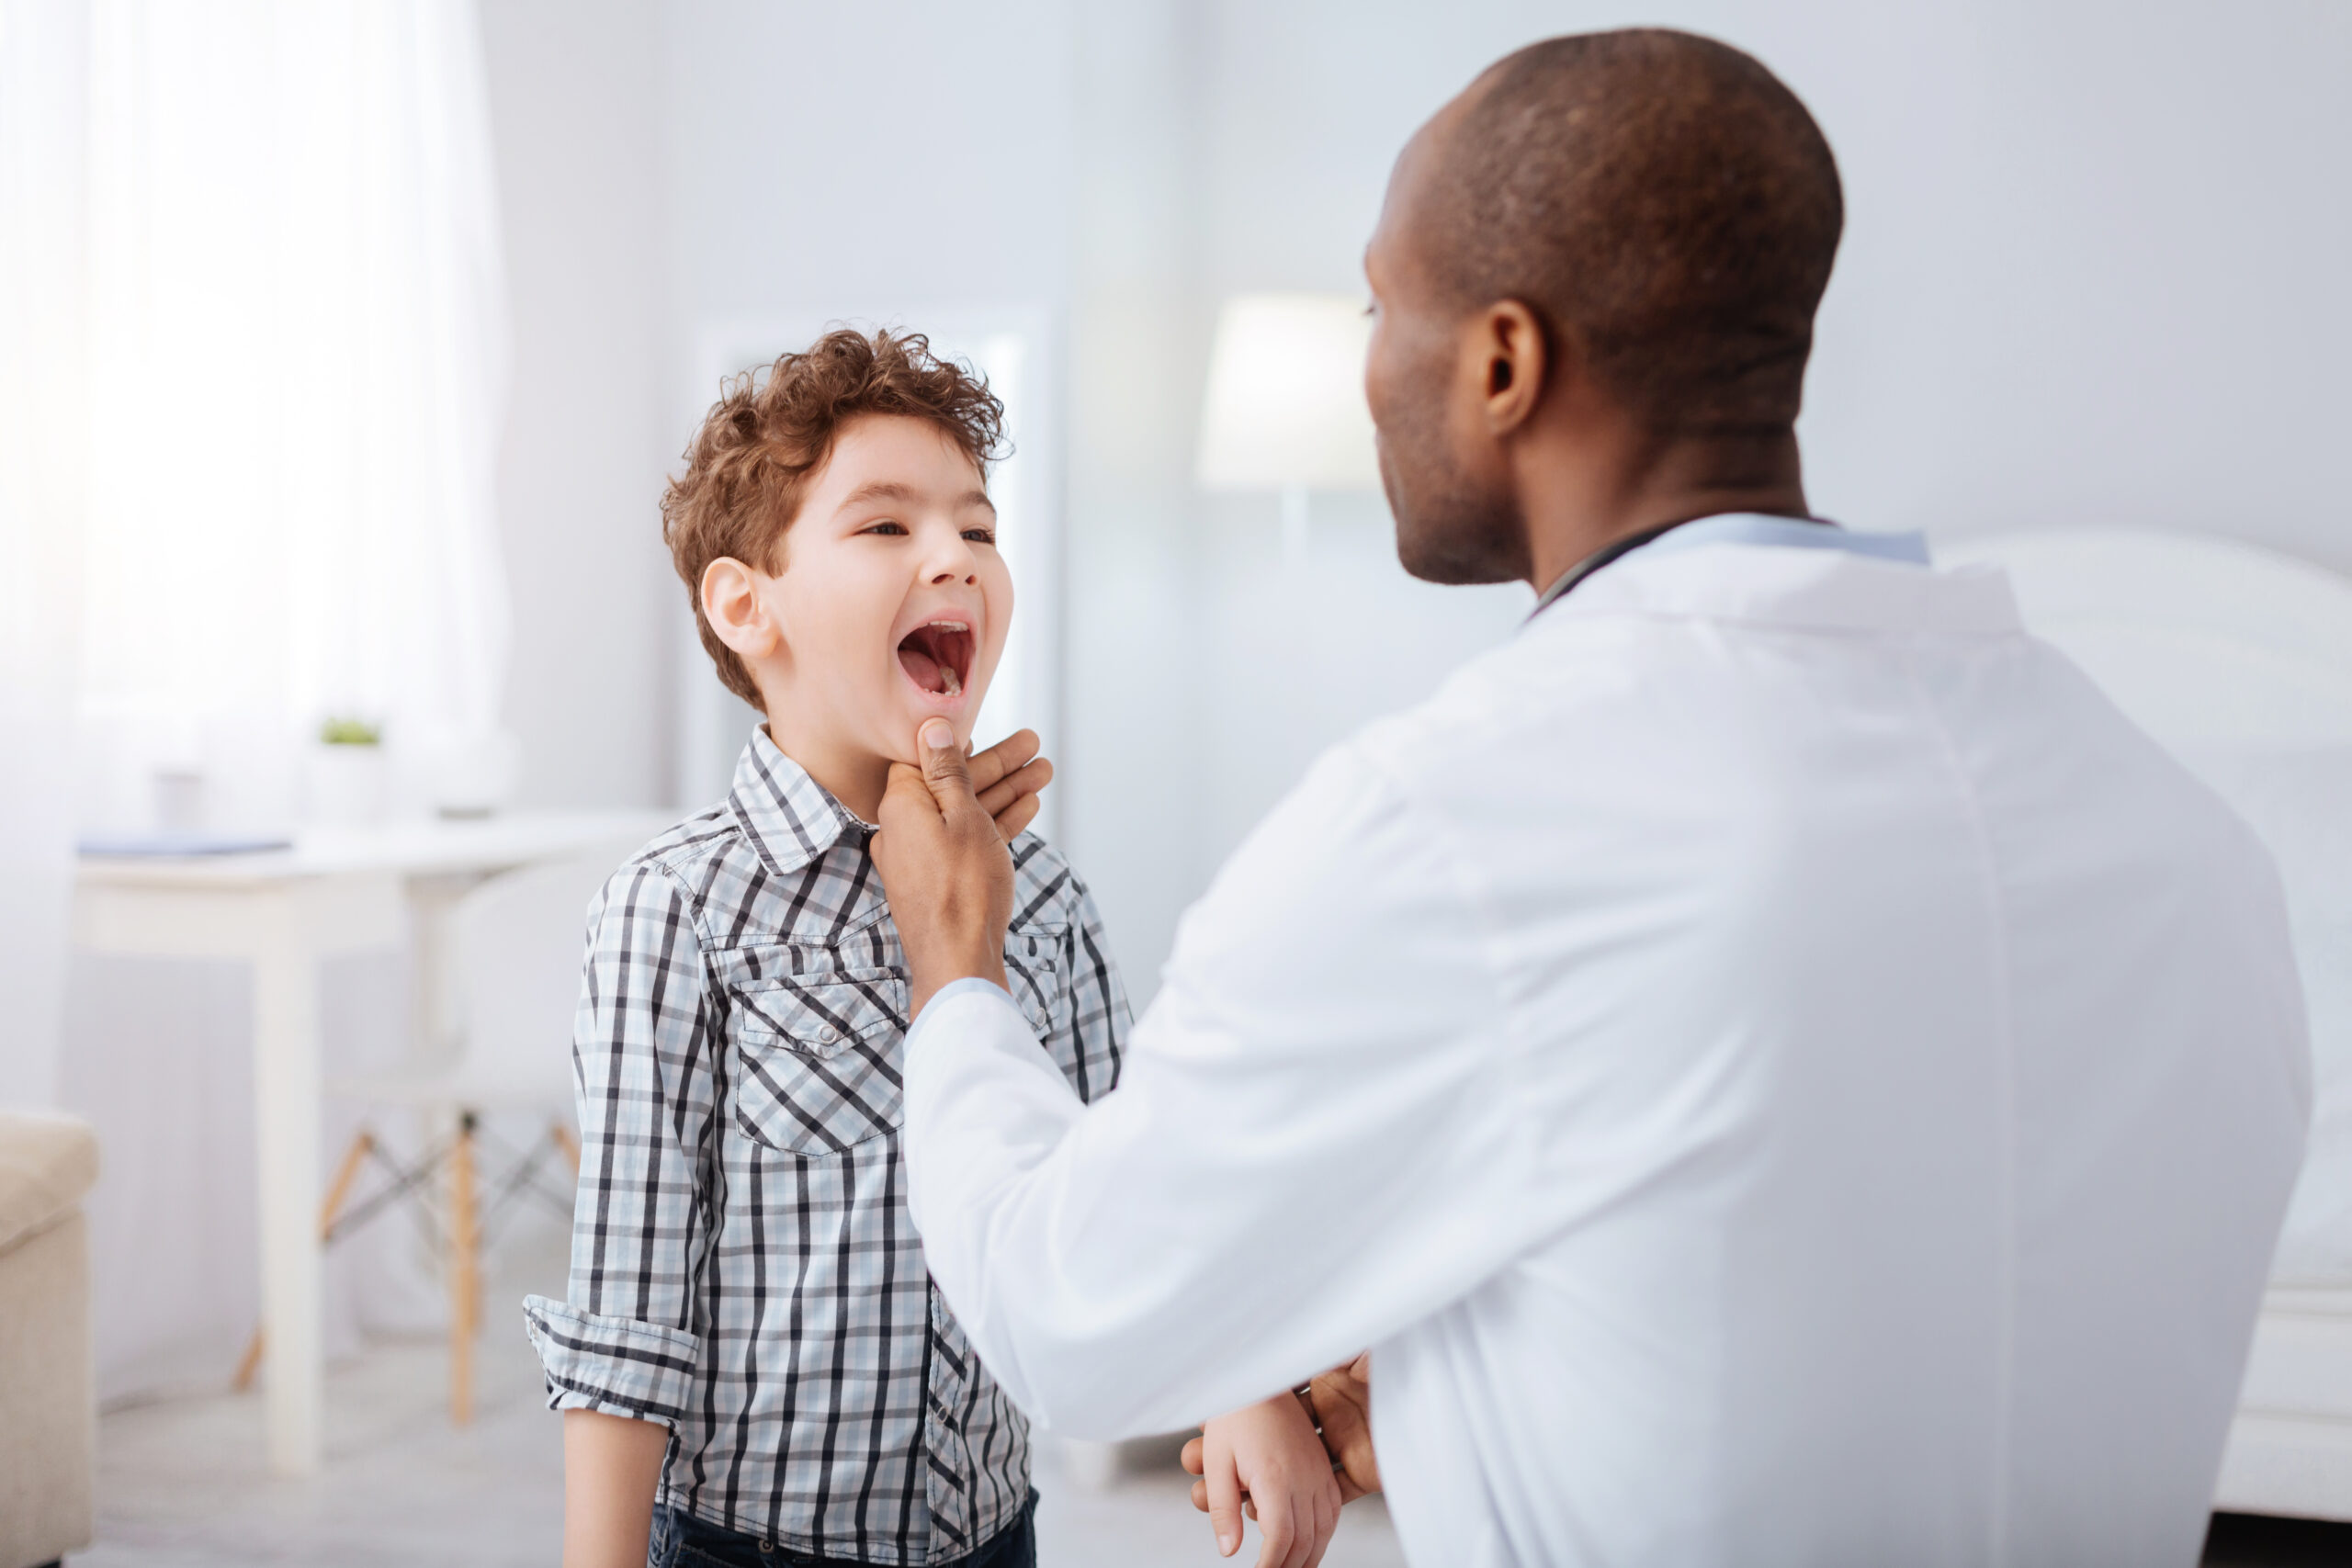 We’re finally understanding why some kids get strep throat over and over again